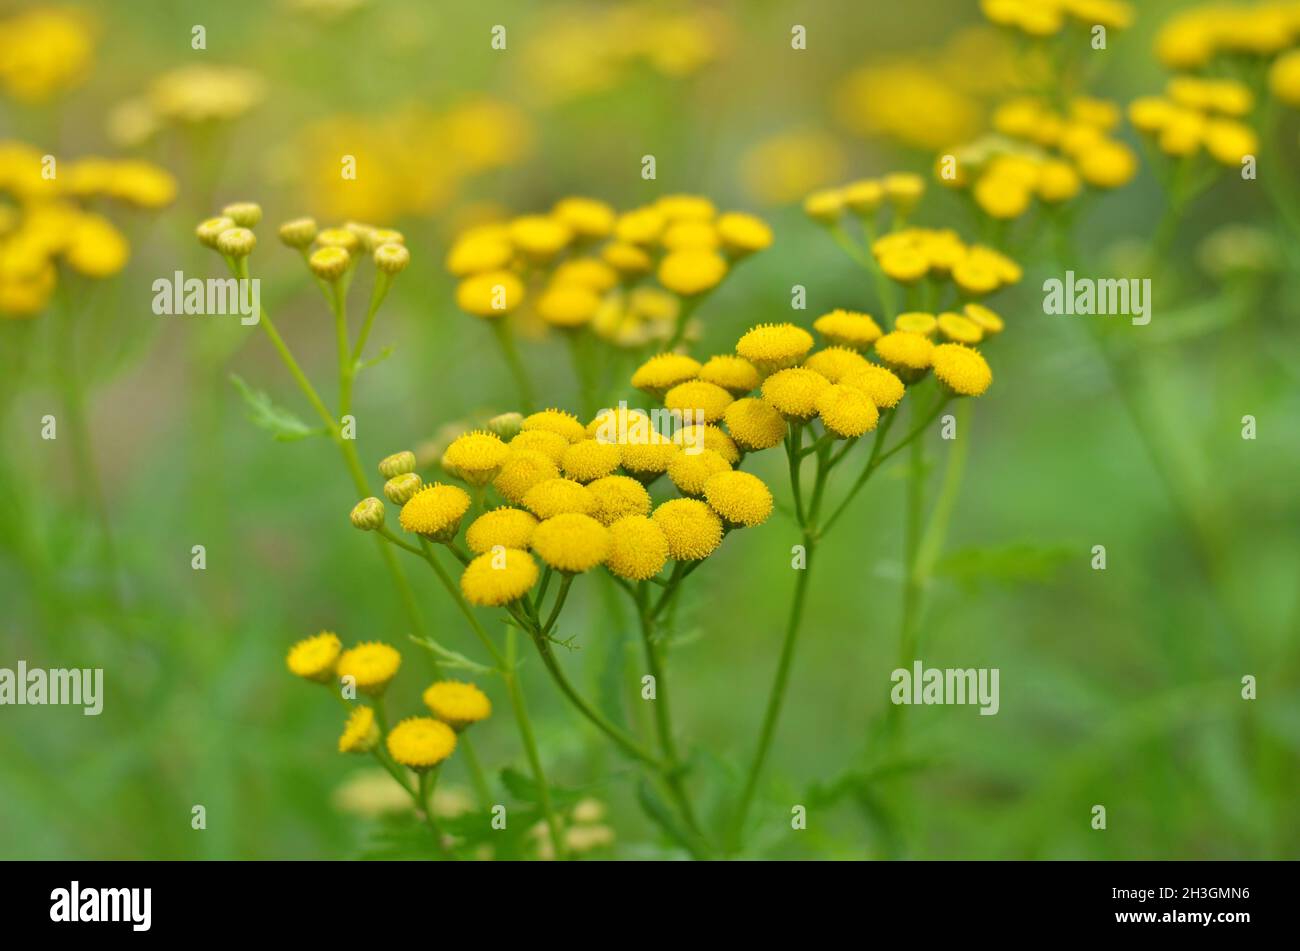 Tanacetum vulgareis or Tansy is a perennial herbaceous flowering plant used in homeopathy. It is also known as common tansy, bitter buttons, golden bu Stock Photo